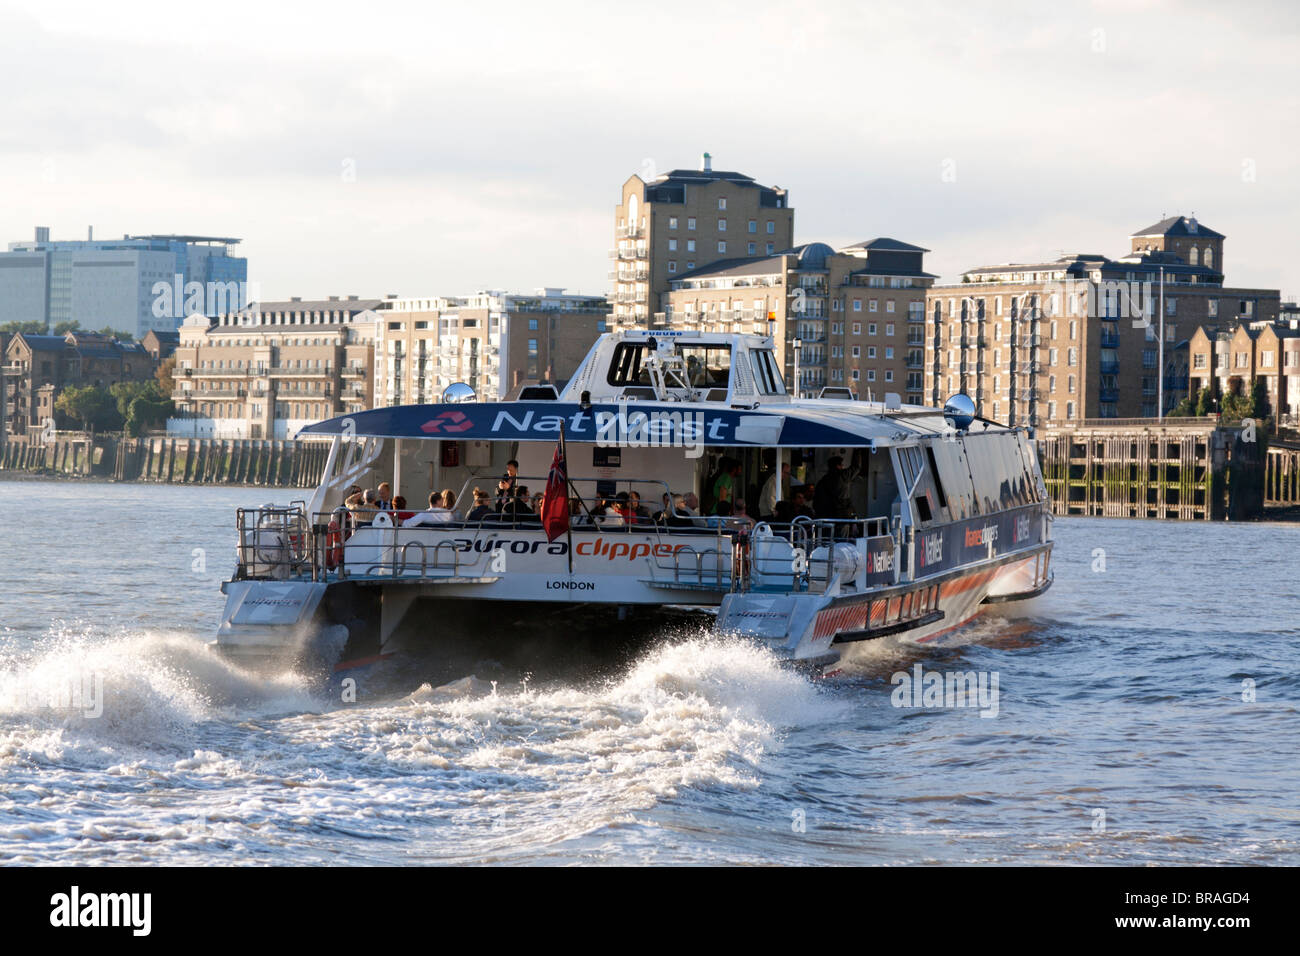 London River services - Thames Clipper - Canary Wharf - London Stock Photo